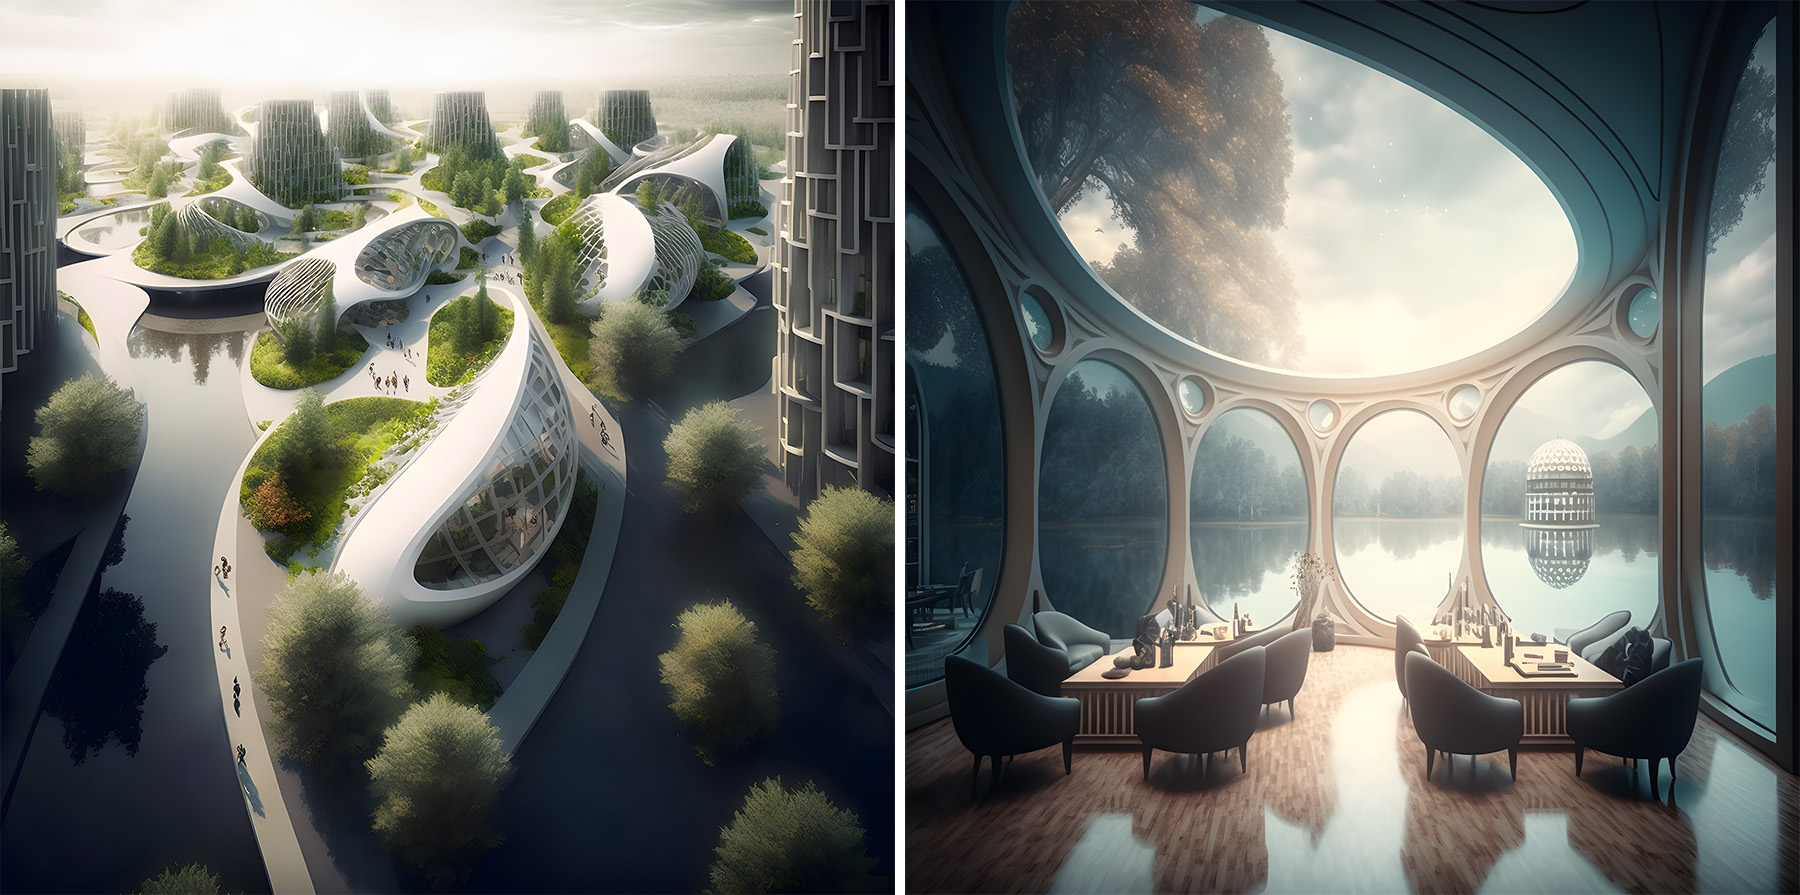 Image shows what a floating city could look like with green spaces, sidewalks, tall trees, and homes with big windows to see nature.